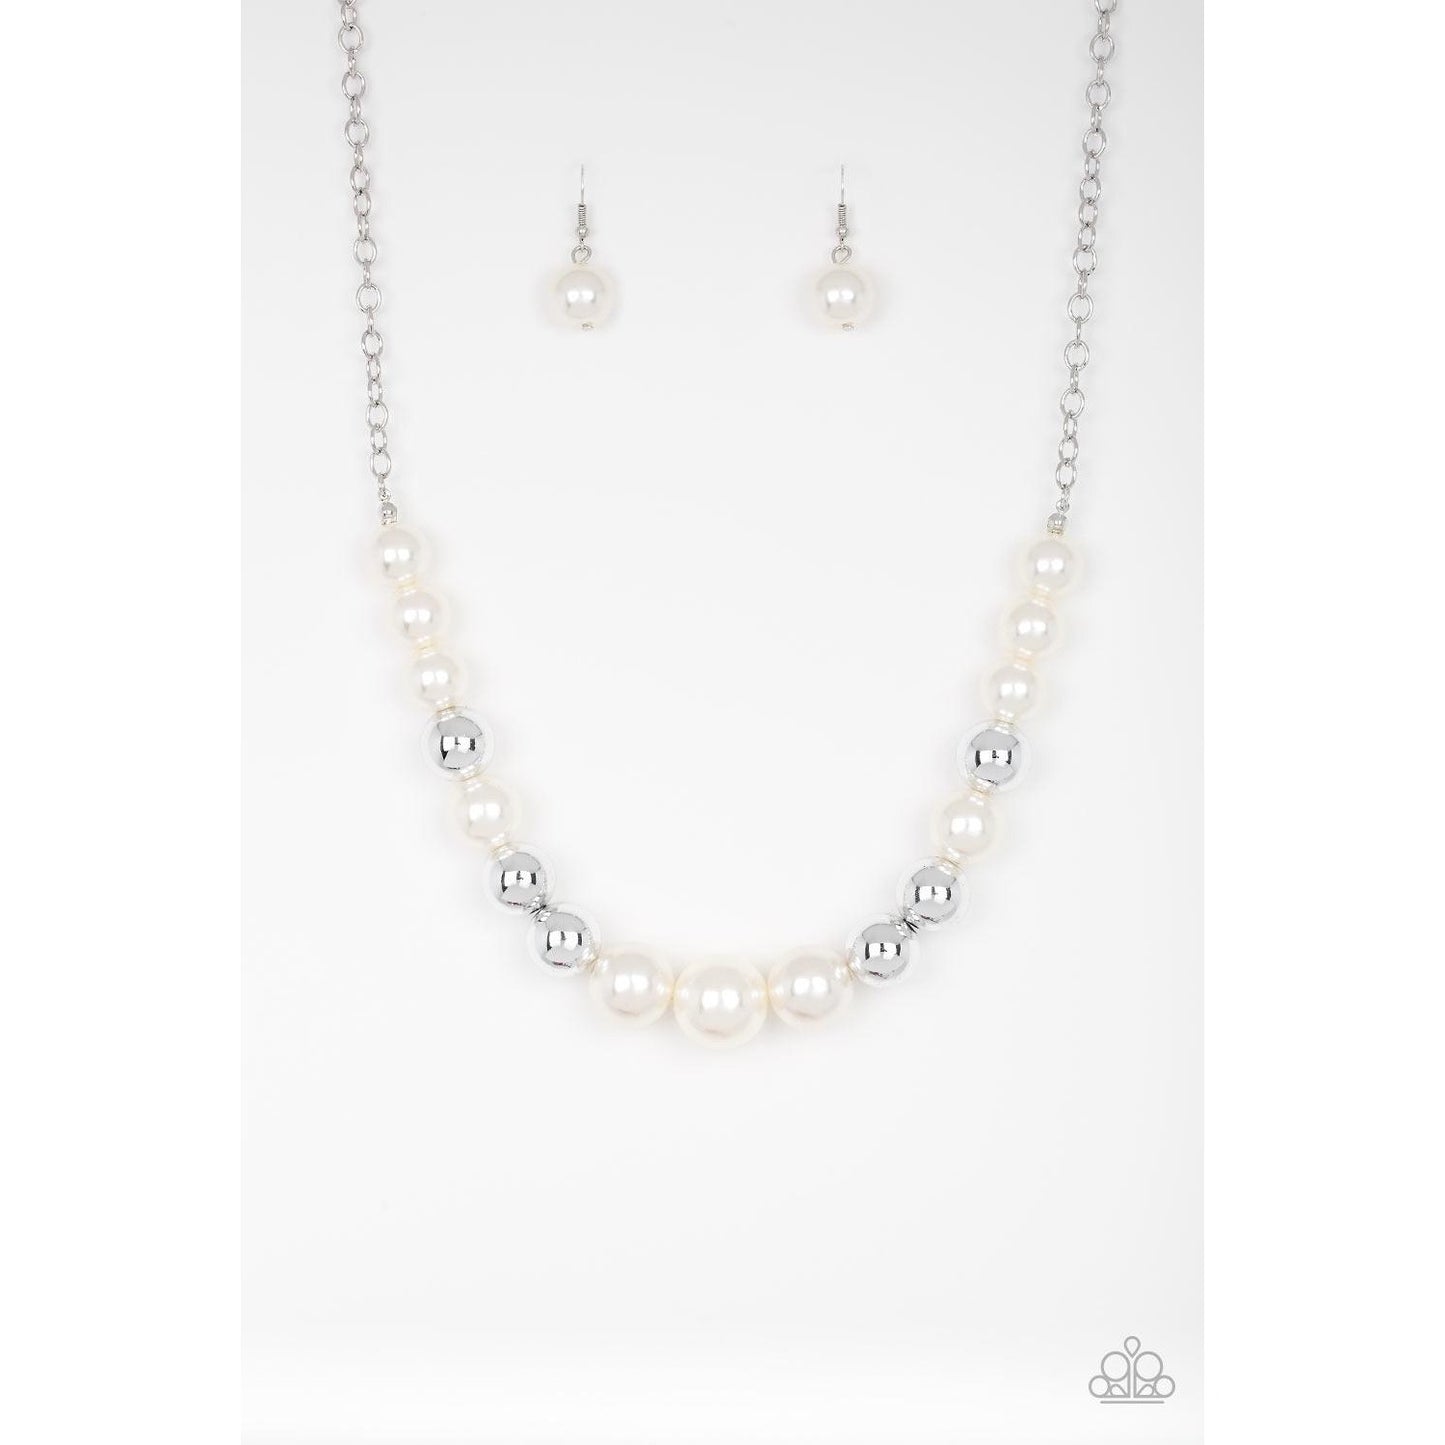 Take Note - White Necklace Earrings 793